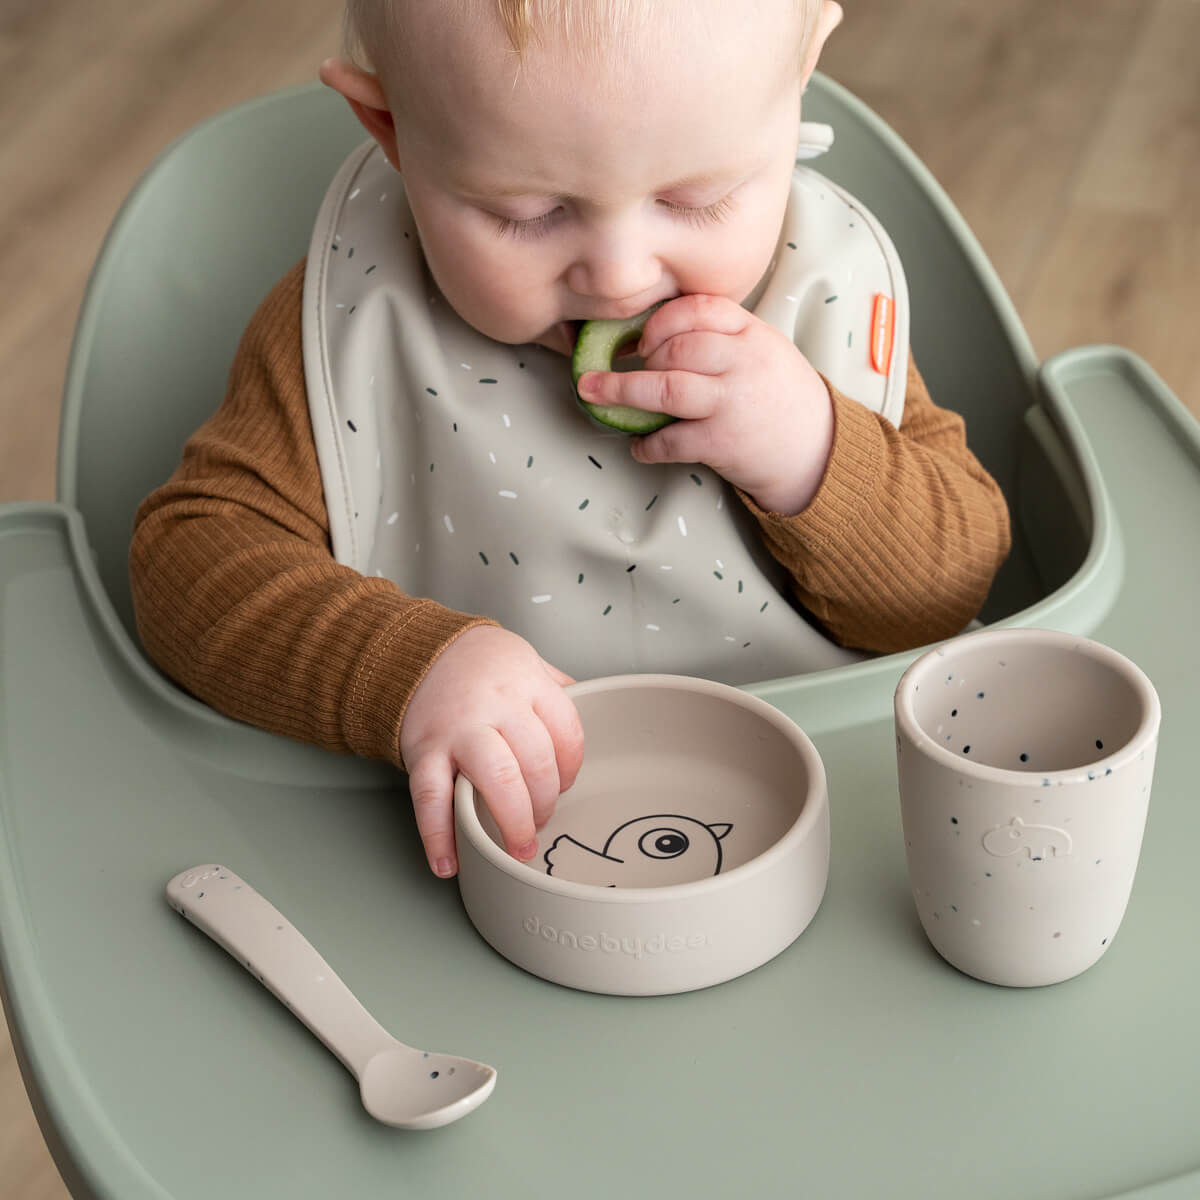 Silicone first meal set - Birdee - Sand